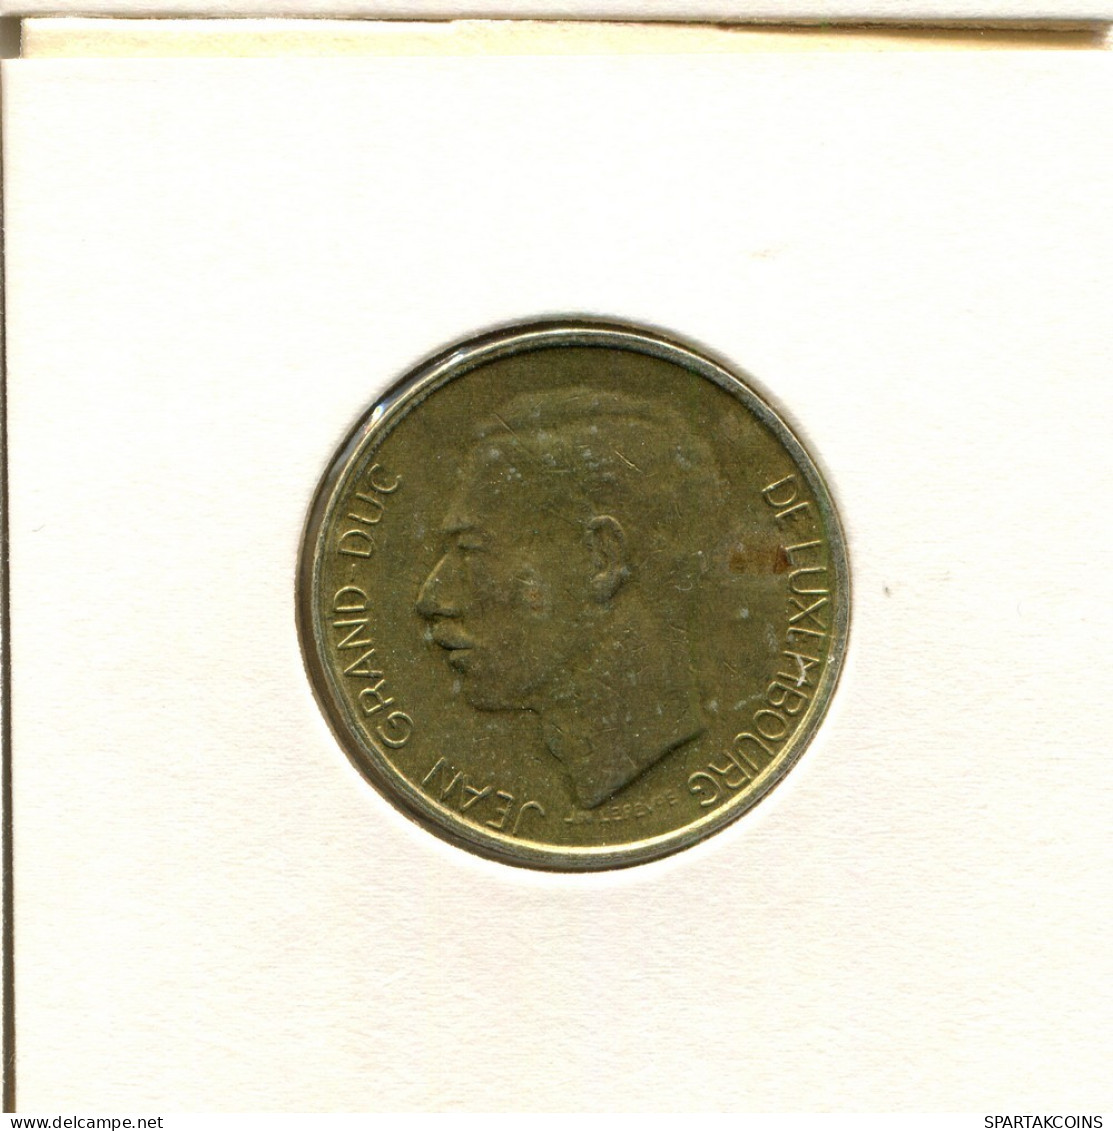 5 FRANCS 1987 LUXEMBURG LUXEMBOURG Münze #BA046.D.A - Luxembourg